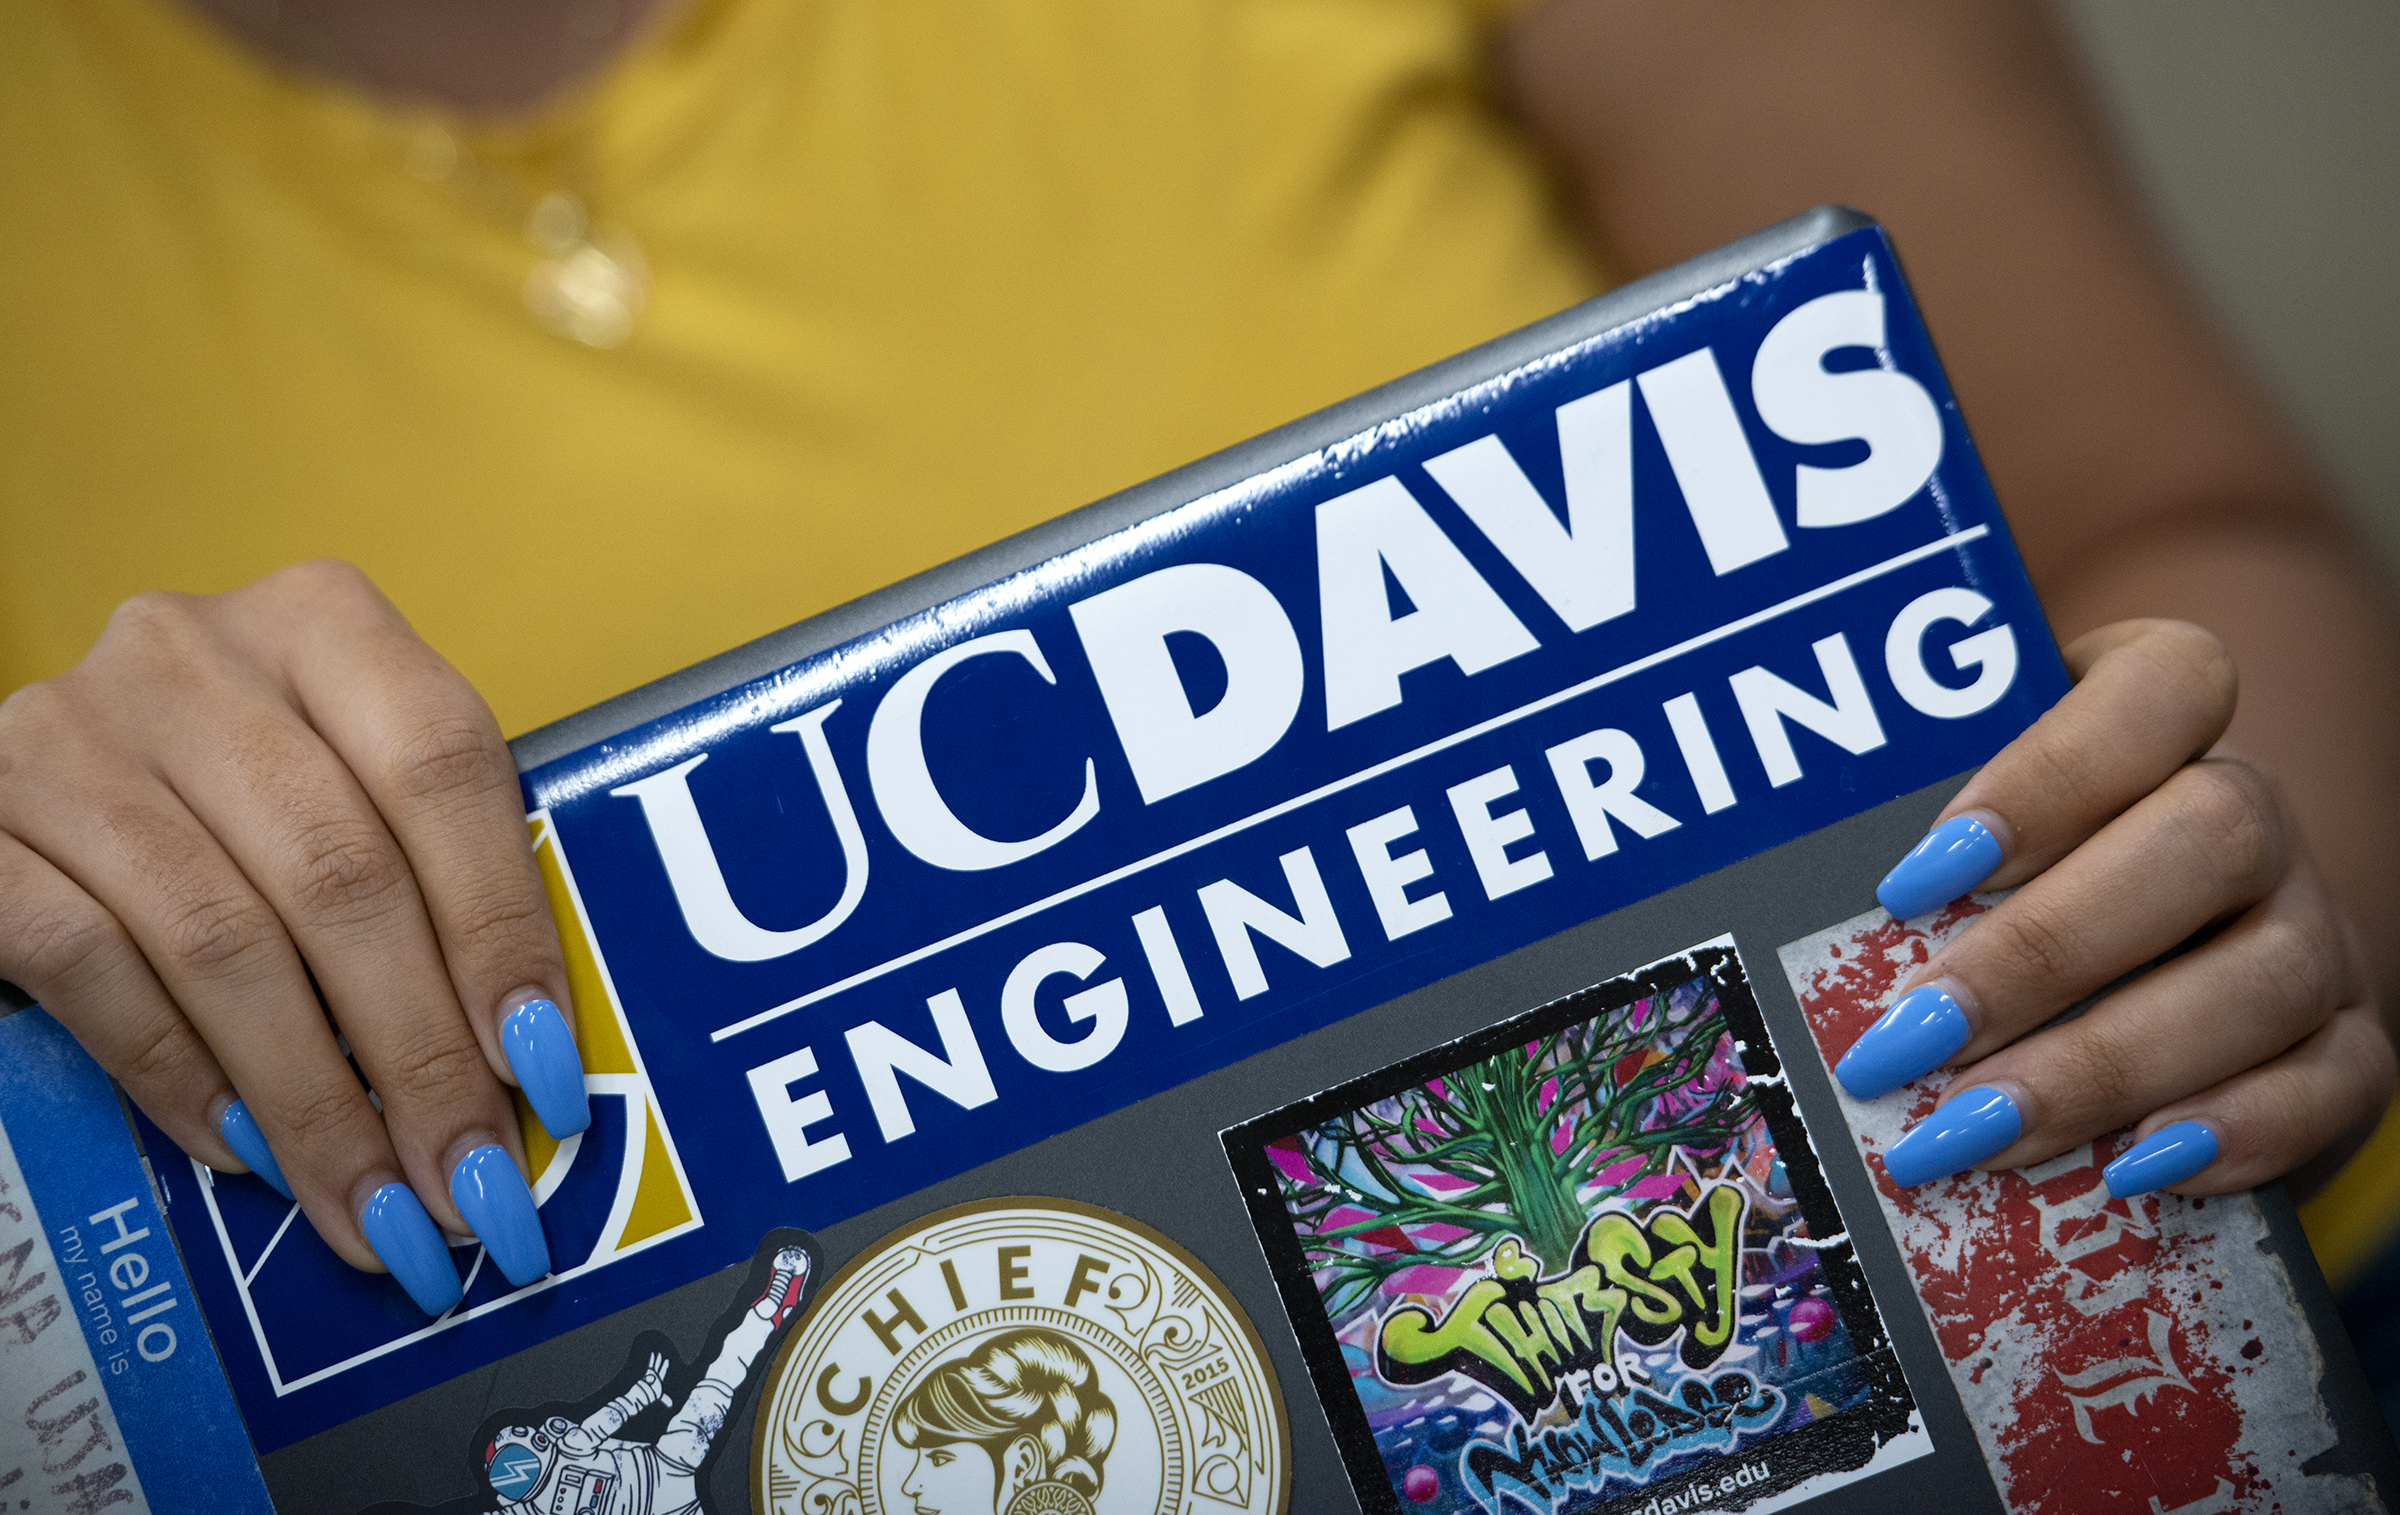 Closeup view of a person's hands while blue manicured nails holding a laptop computer covered in a variety of stickers. The largest sticker reads "UC Davis Engineering."